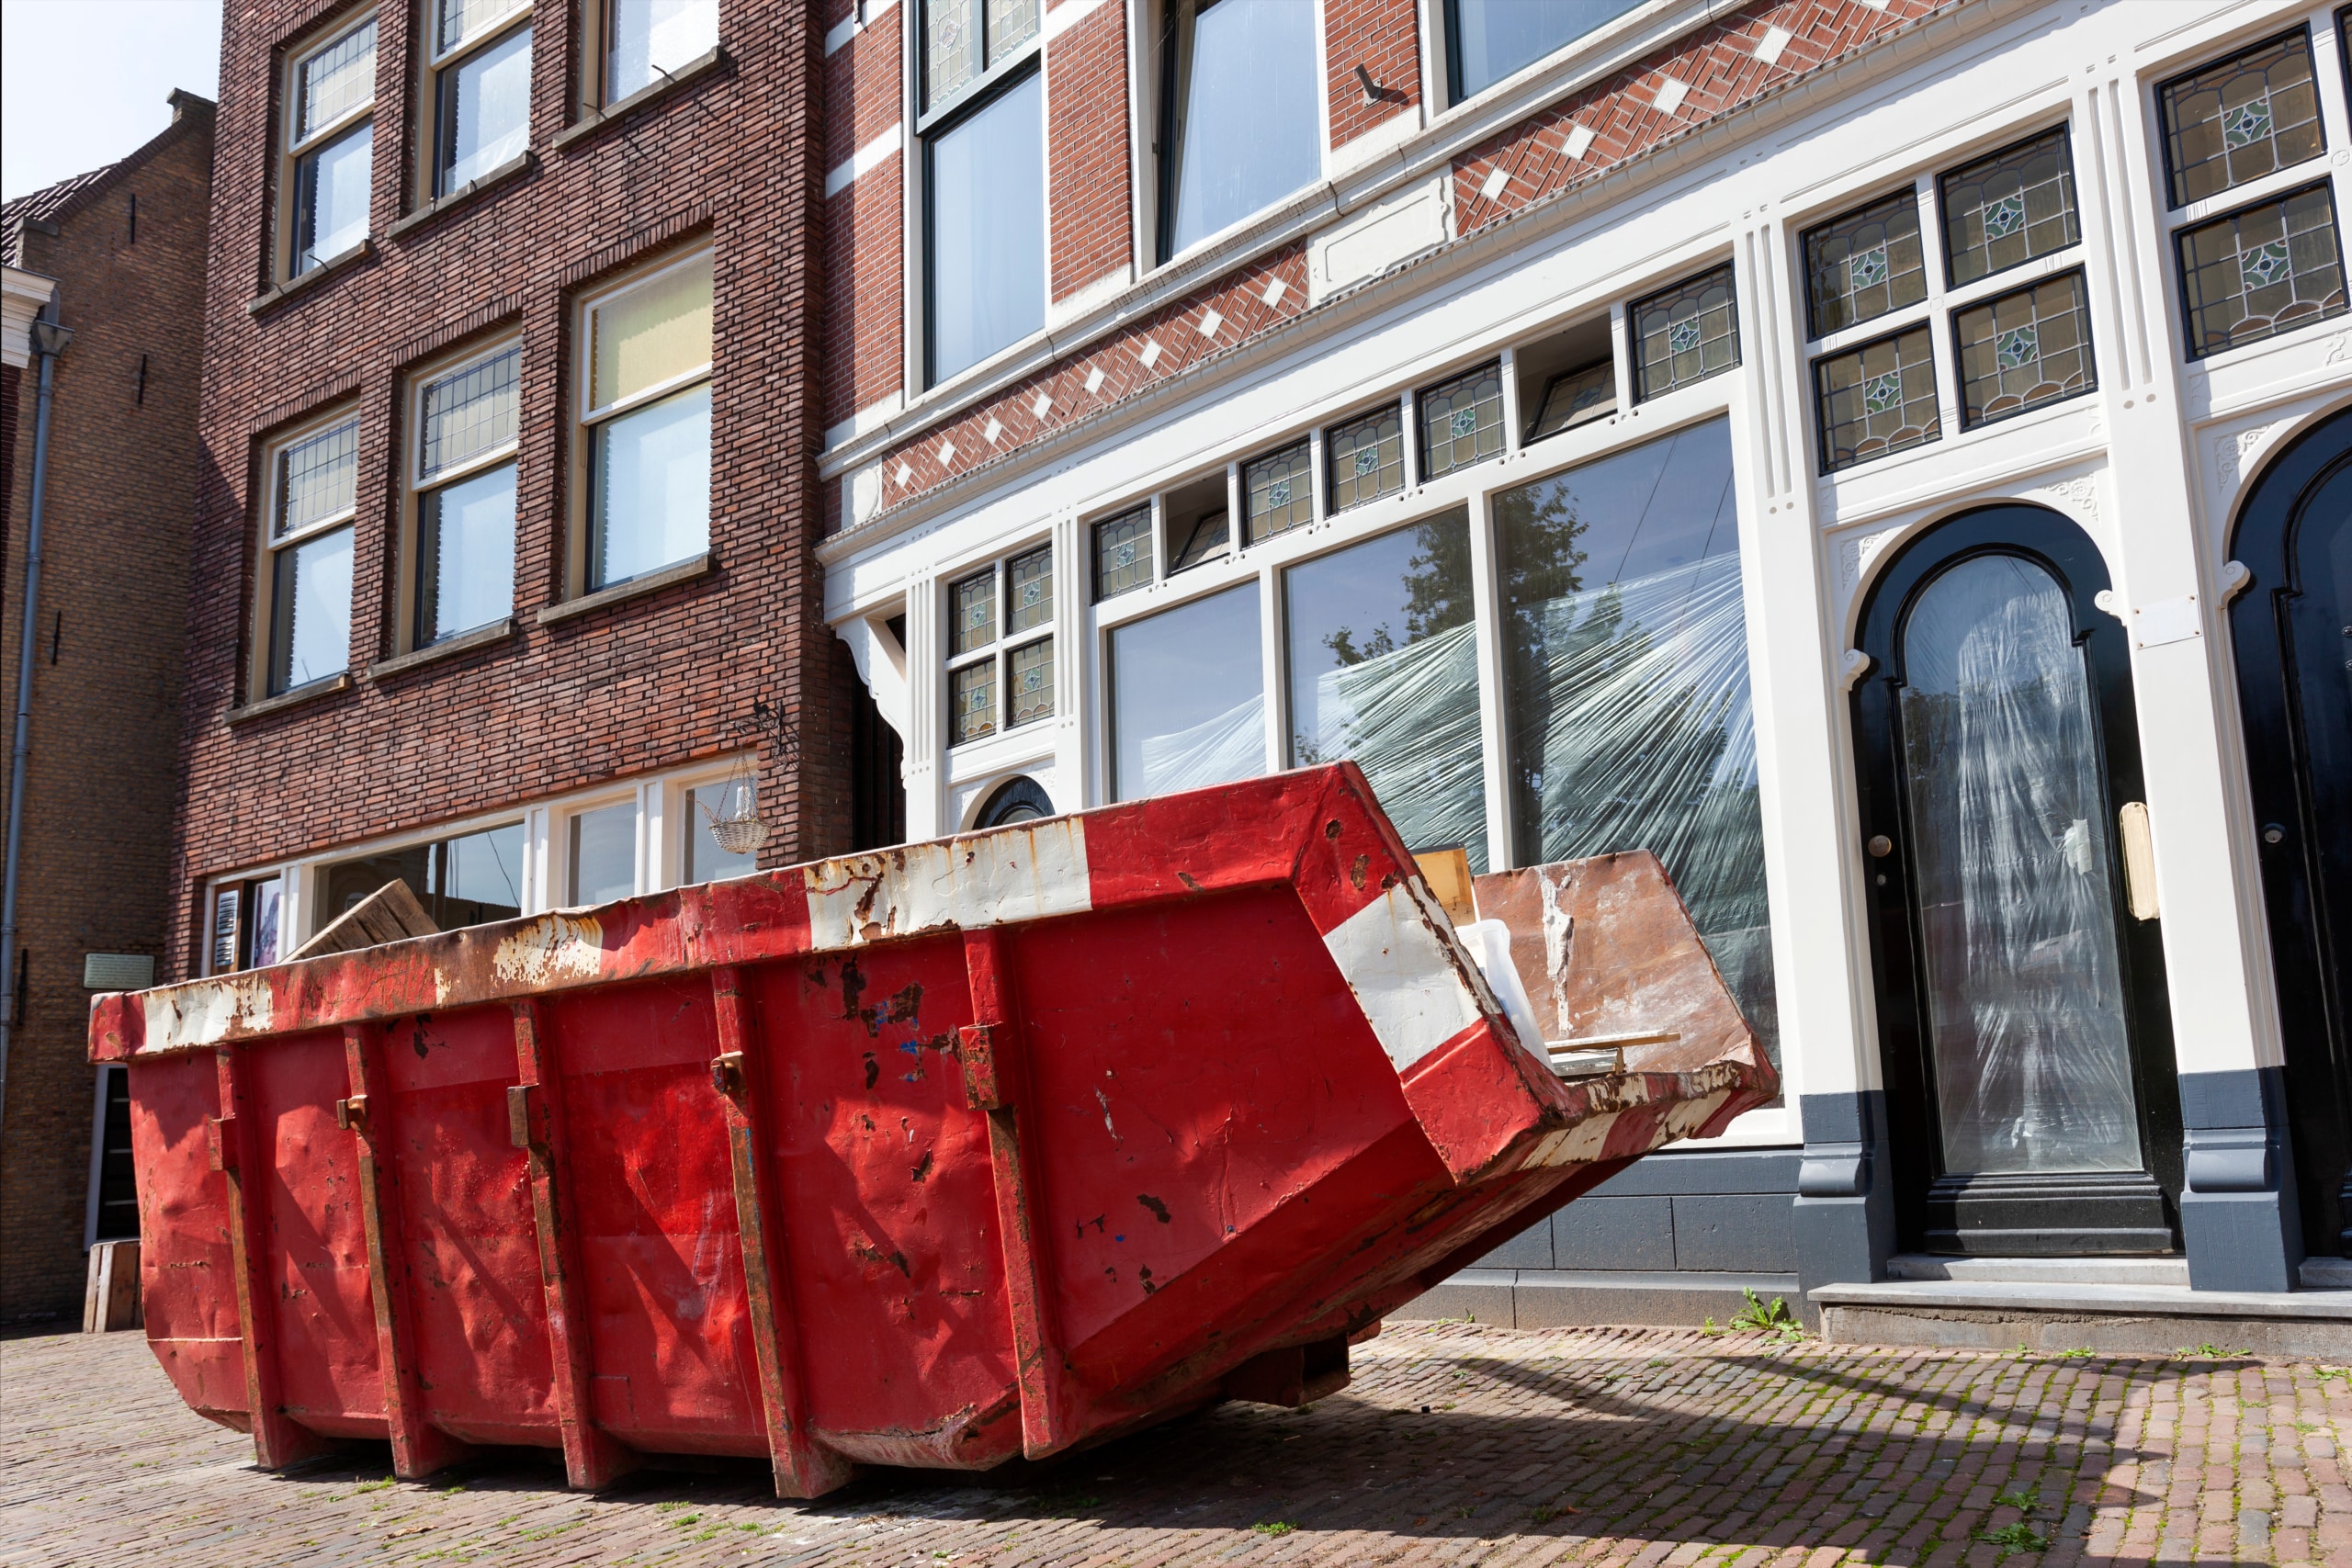 Surprising Uses for Dumpster Rentals You Haven’t Considered Yet